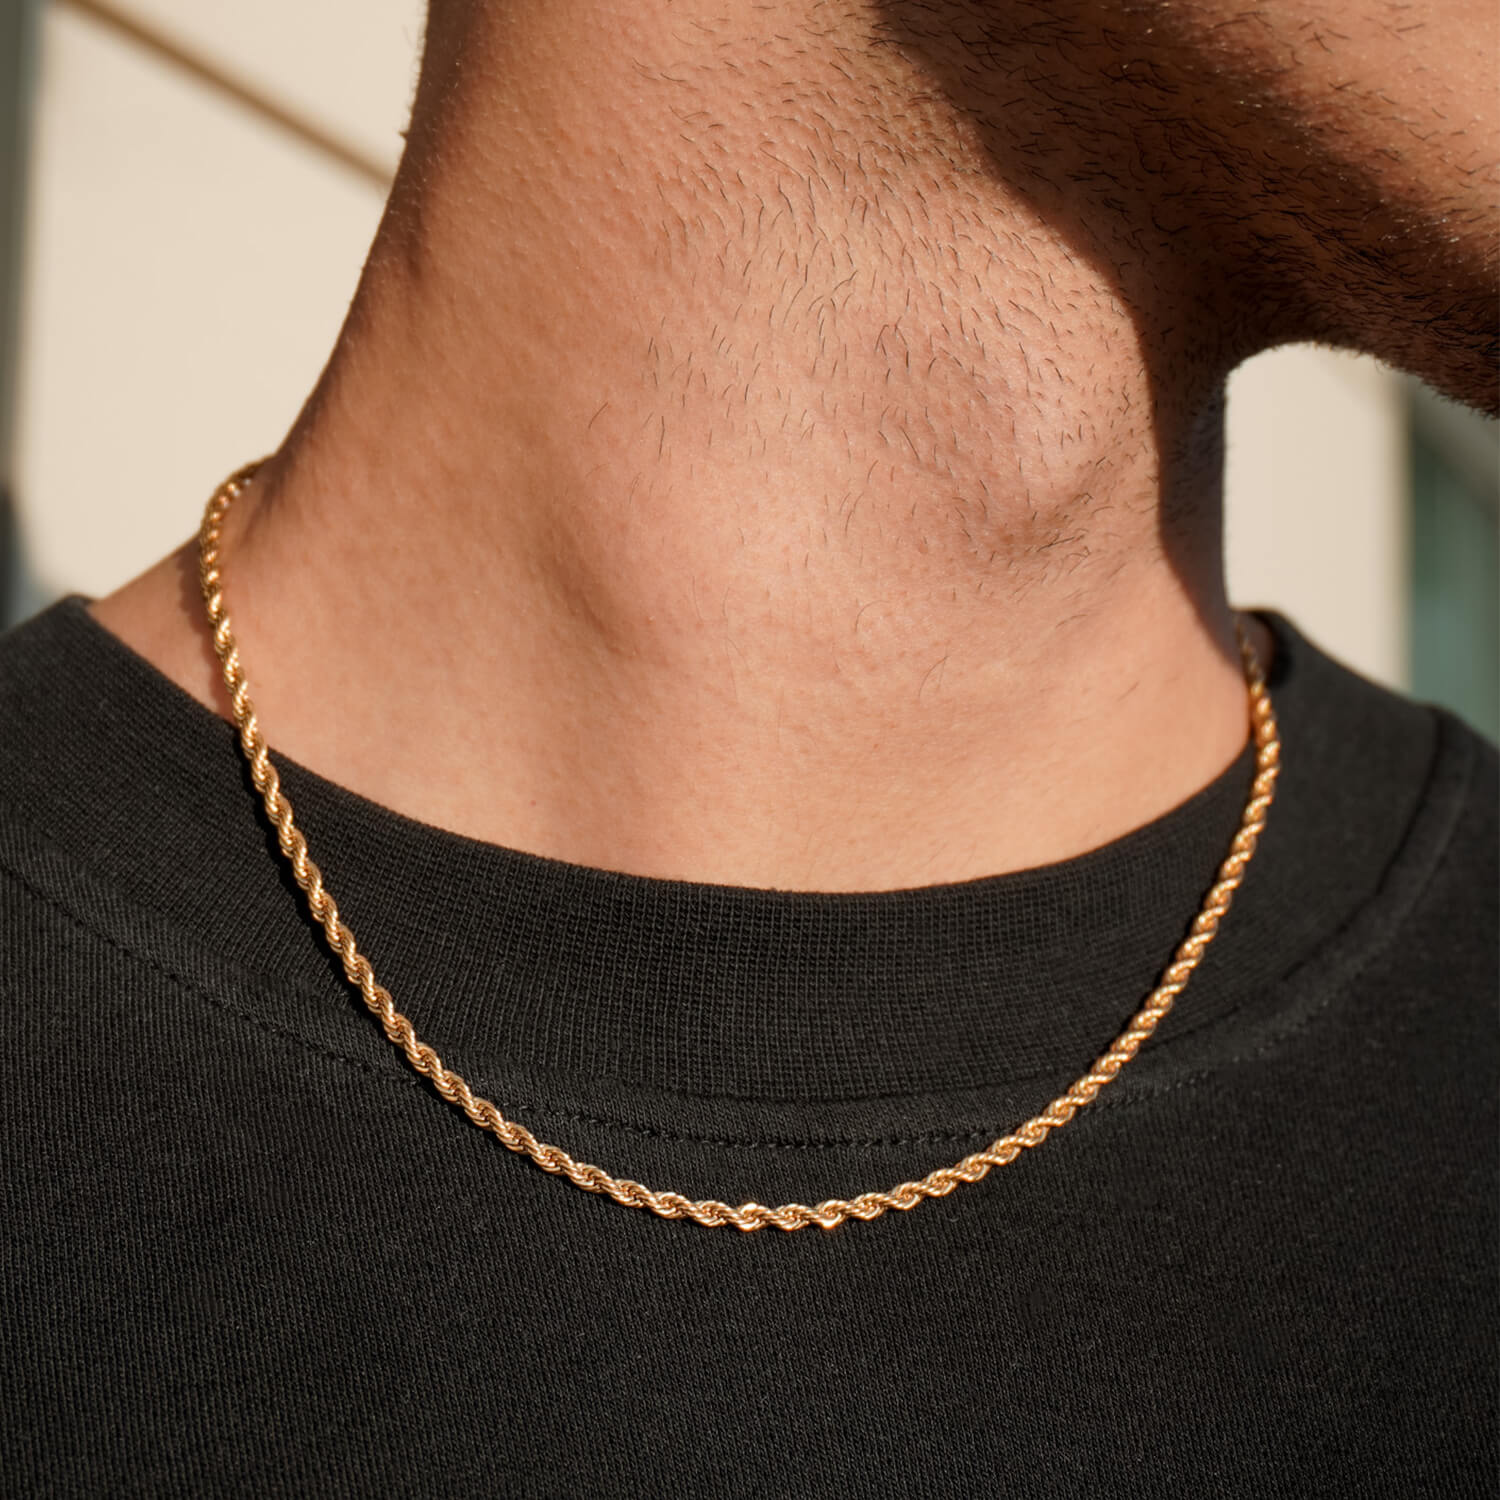 3mm gold rope chain on male neck